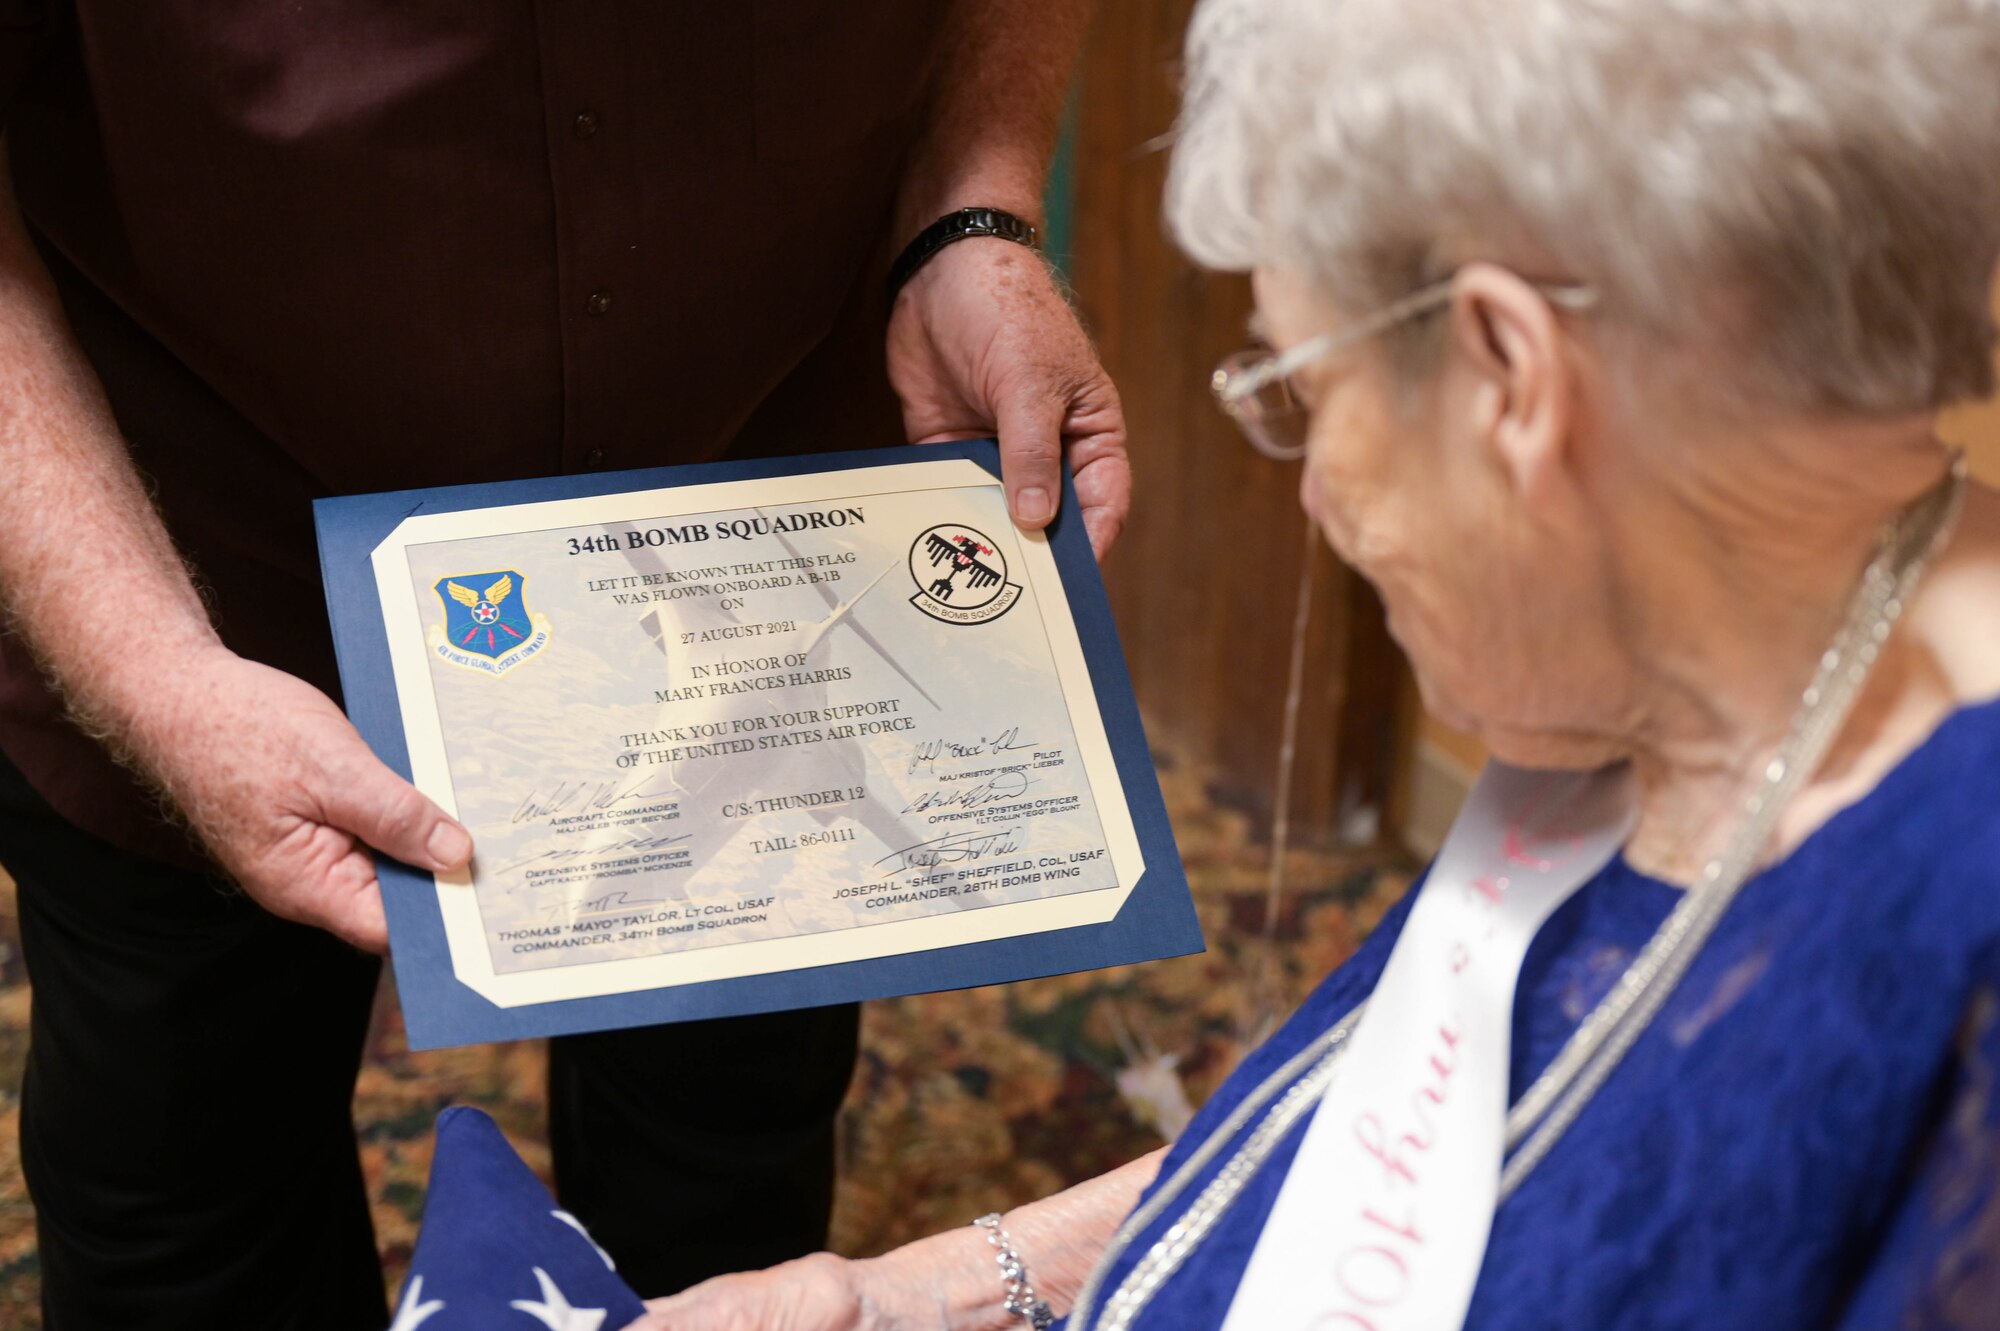 Fran Harris, former secretary for the Base Supply commander at Ellsworth Air Force Base, S.D., is presented a certificate of authenticity stating the flag she was given was flown on a B-1B Lancer, during her 100th birthday party in Rapid City, S.D., Sept. 11, 2021.